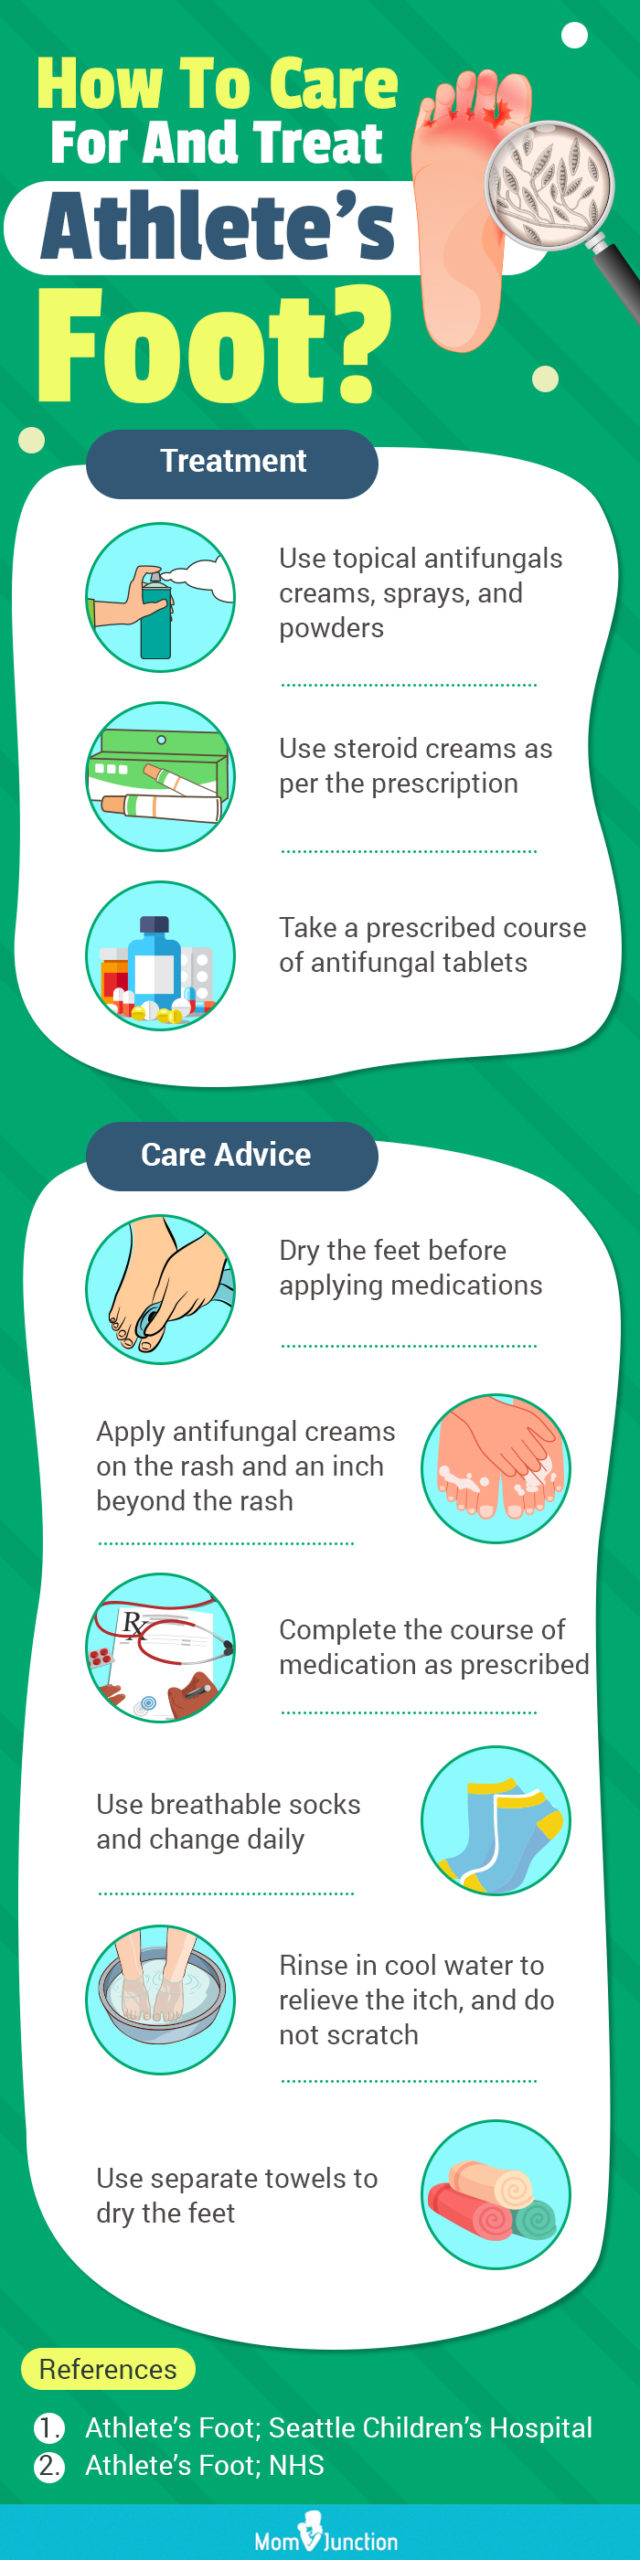 tips for athlete’s foot in children (infographic)